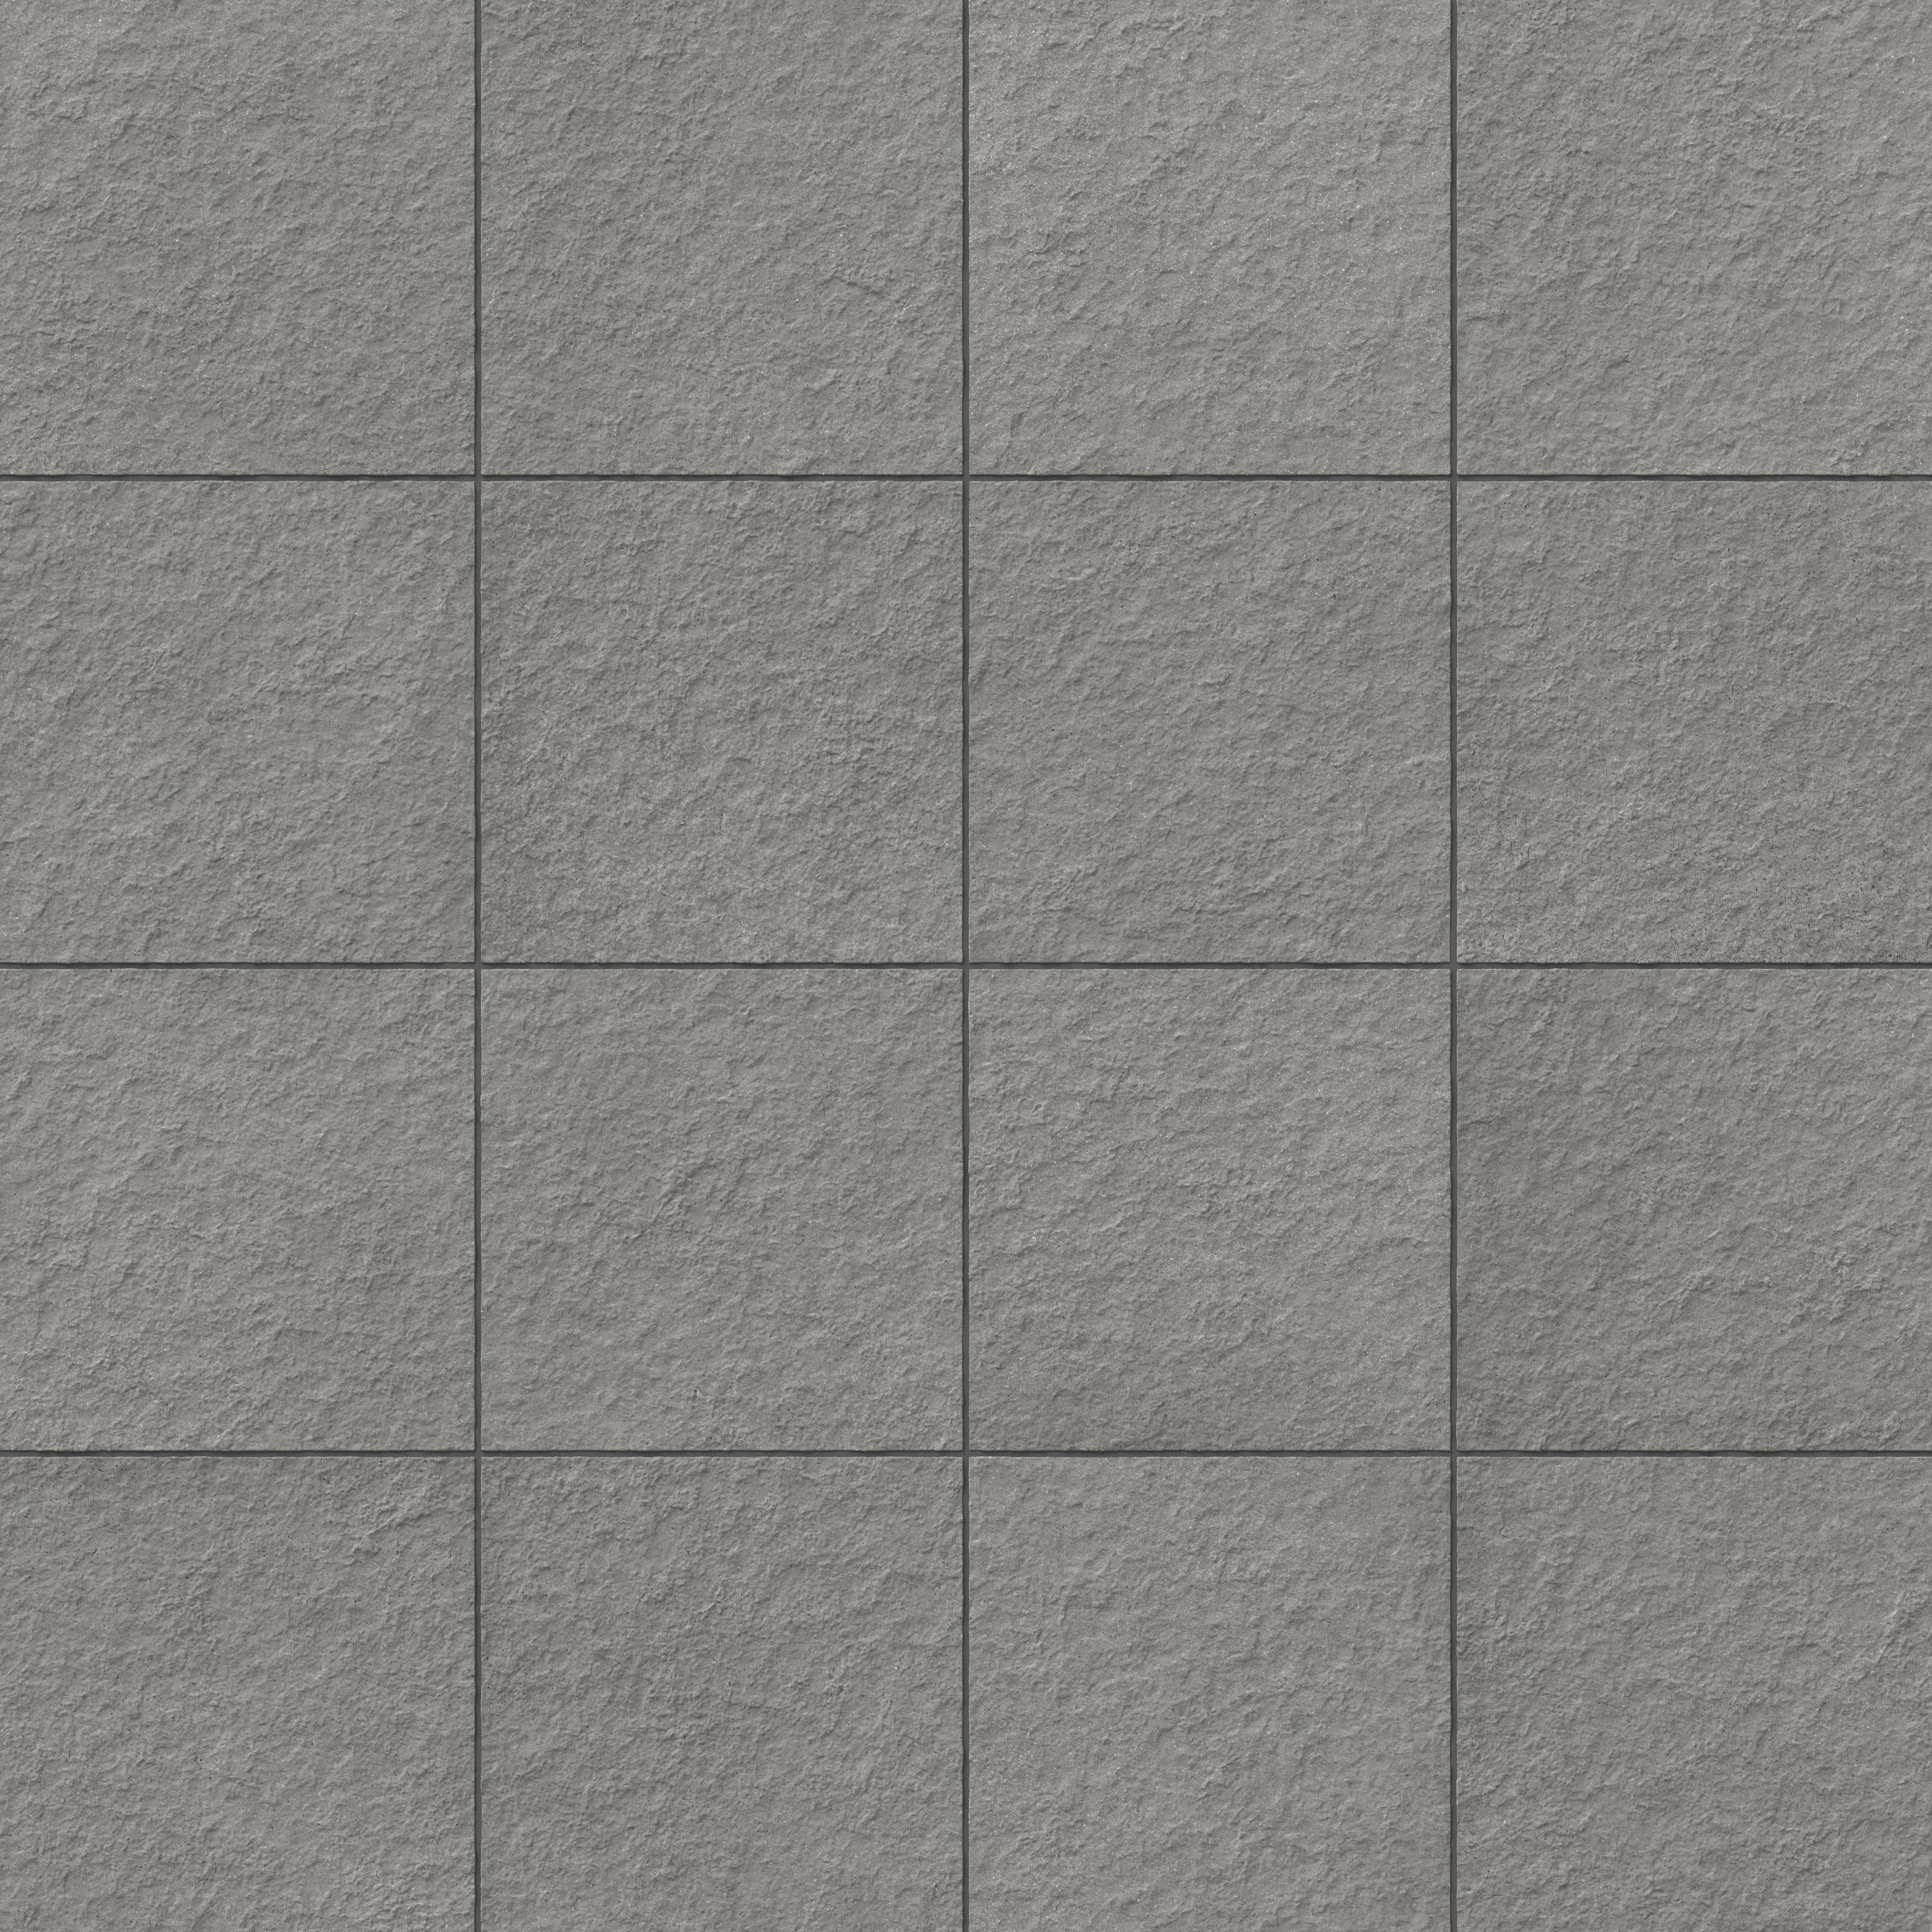 Palmer 12x12 Raw Porcelain Tile in Charcoal